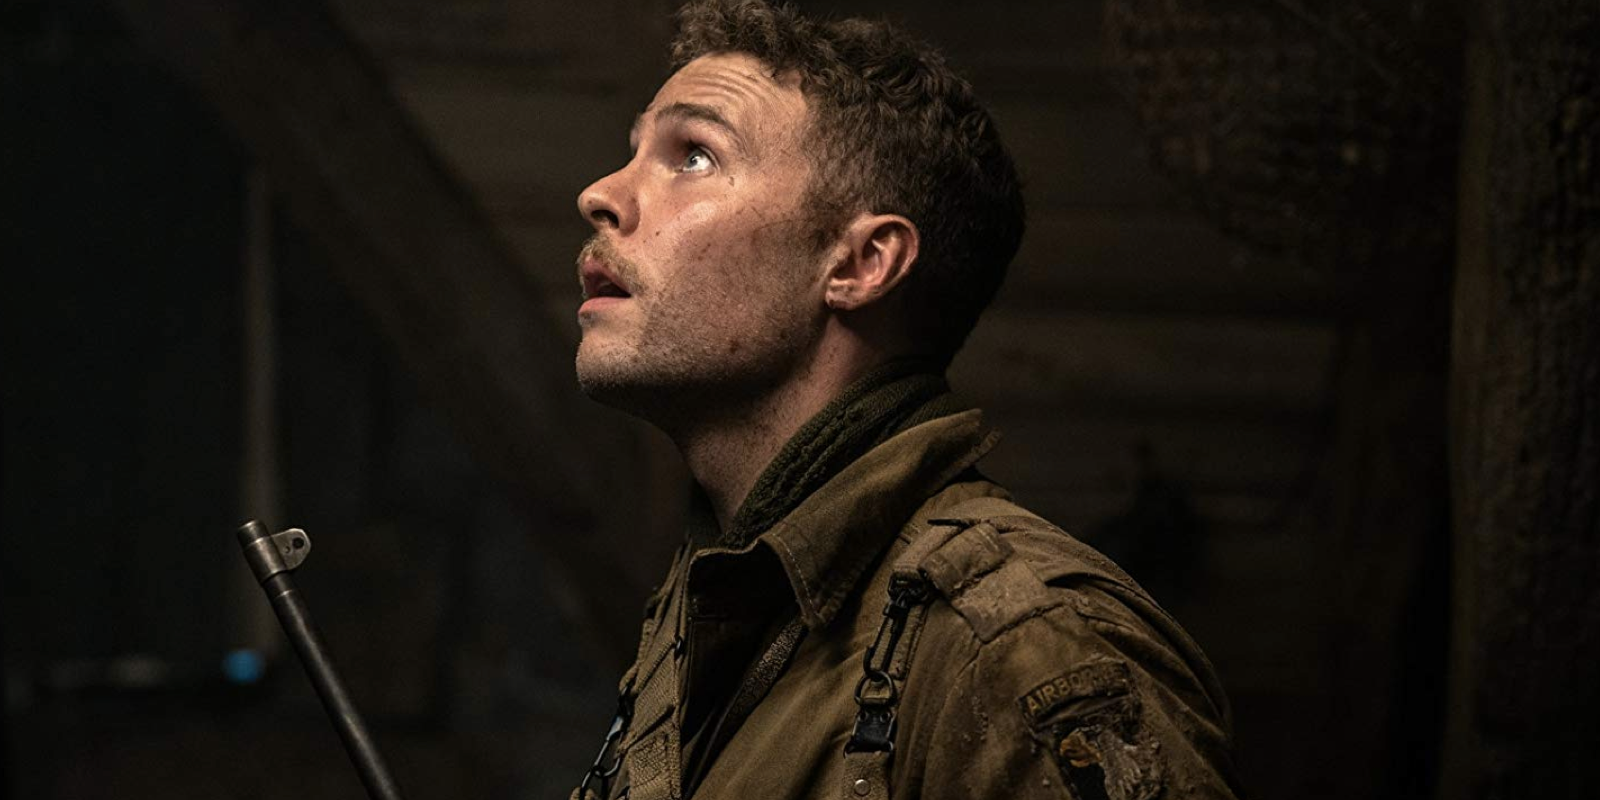 Iain De Caestecker as Private Morton Chase, who tries to figure out the sound outside in Overlord